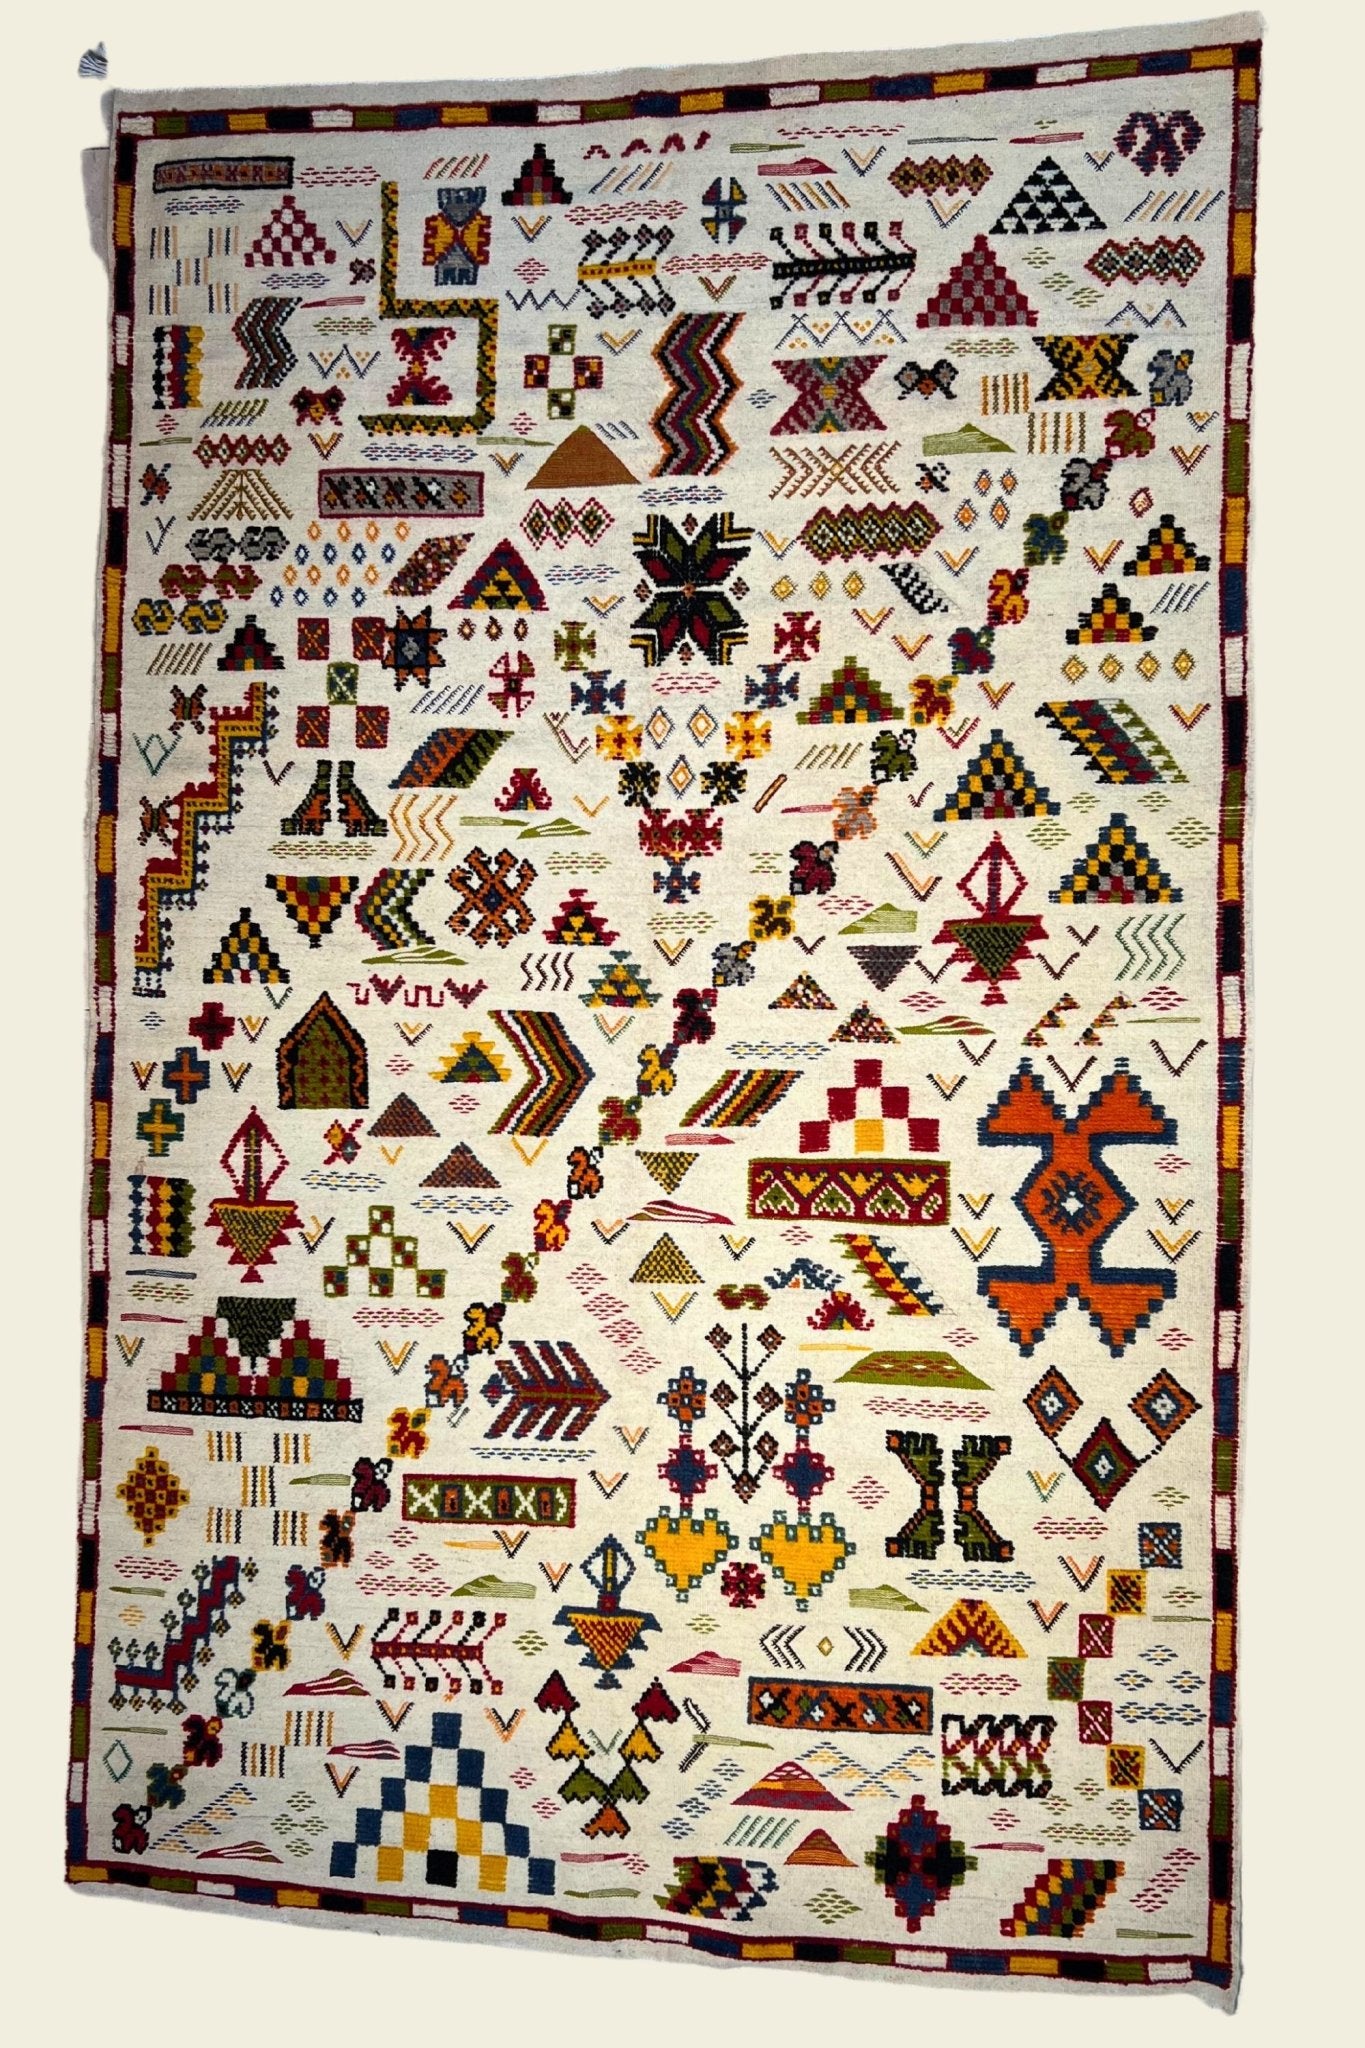 Vintage Moroccan area rug from Akhnif, Wool and Thread, 5'3" x 8'4" Or 159 cm X 254 cm - Dar Bouchaib Marrakech